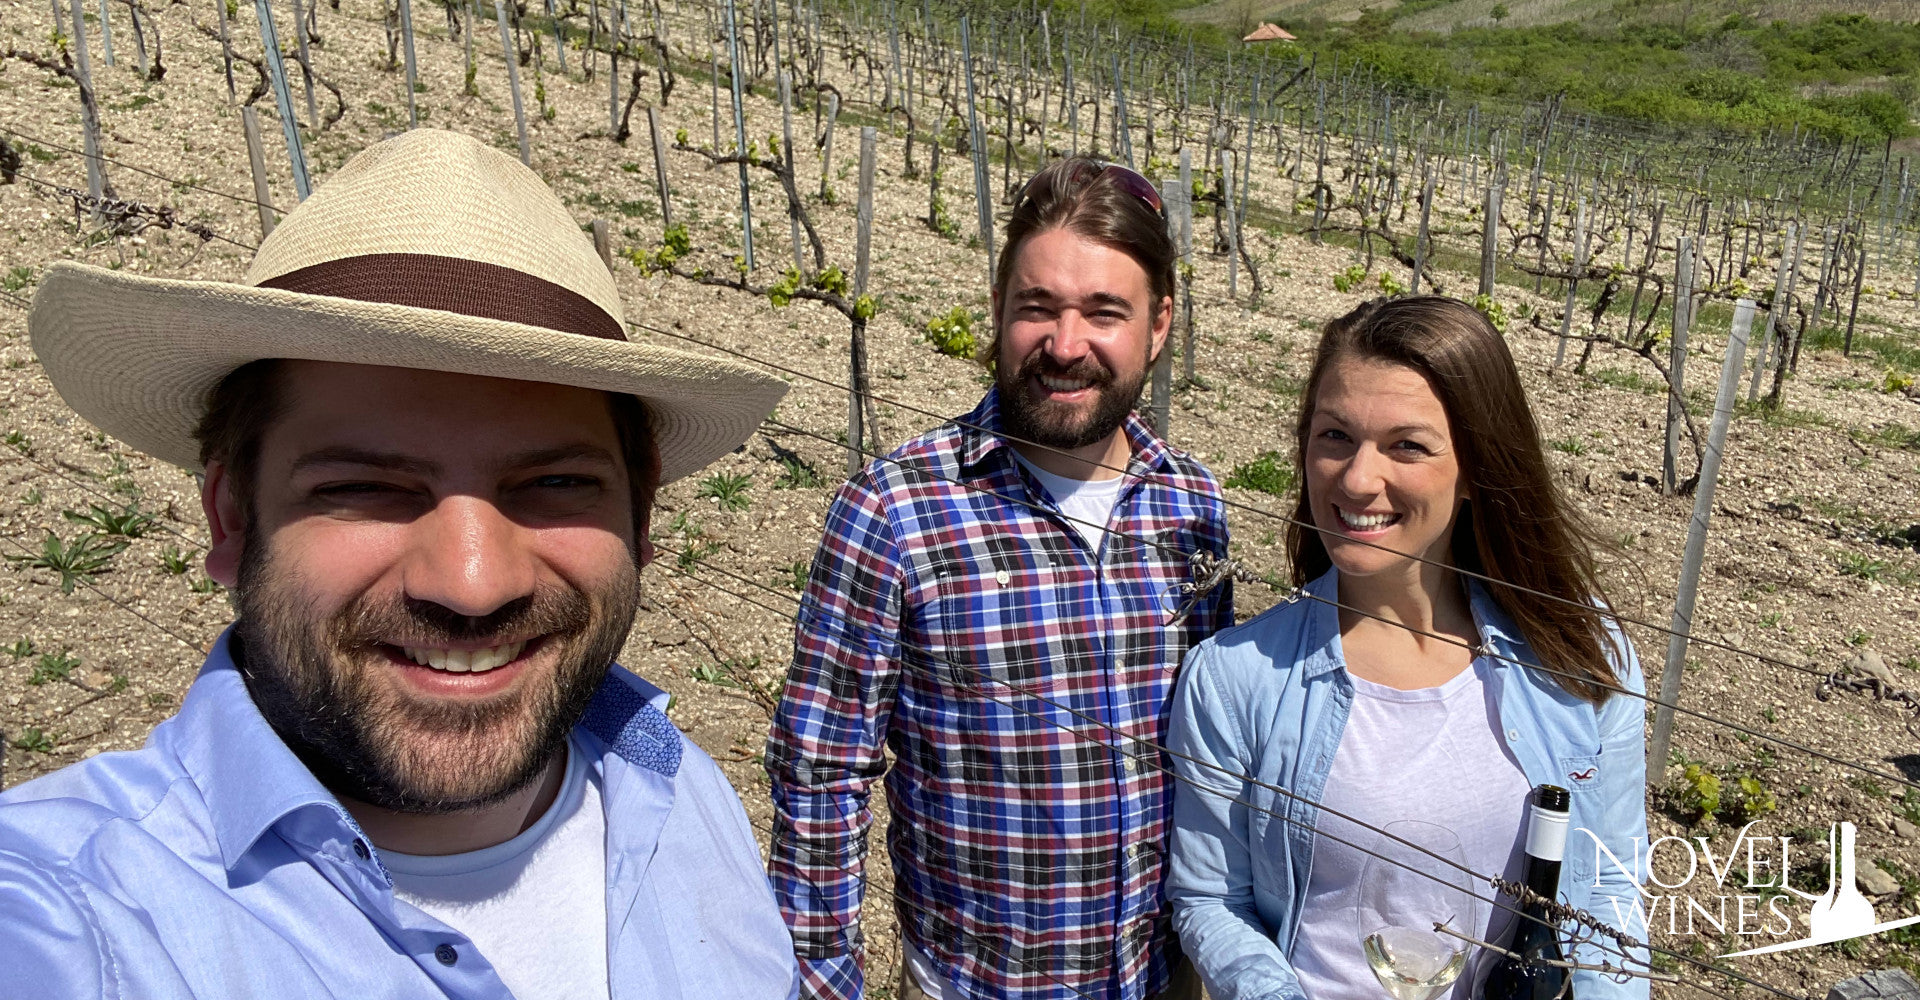 “We are complementing each other” – Meet the Four Tallya Radicals Shaking Up Tokaj Wines, Furmint February 2021